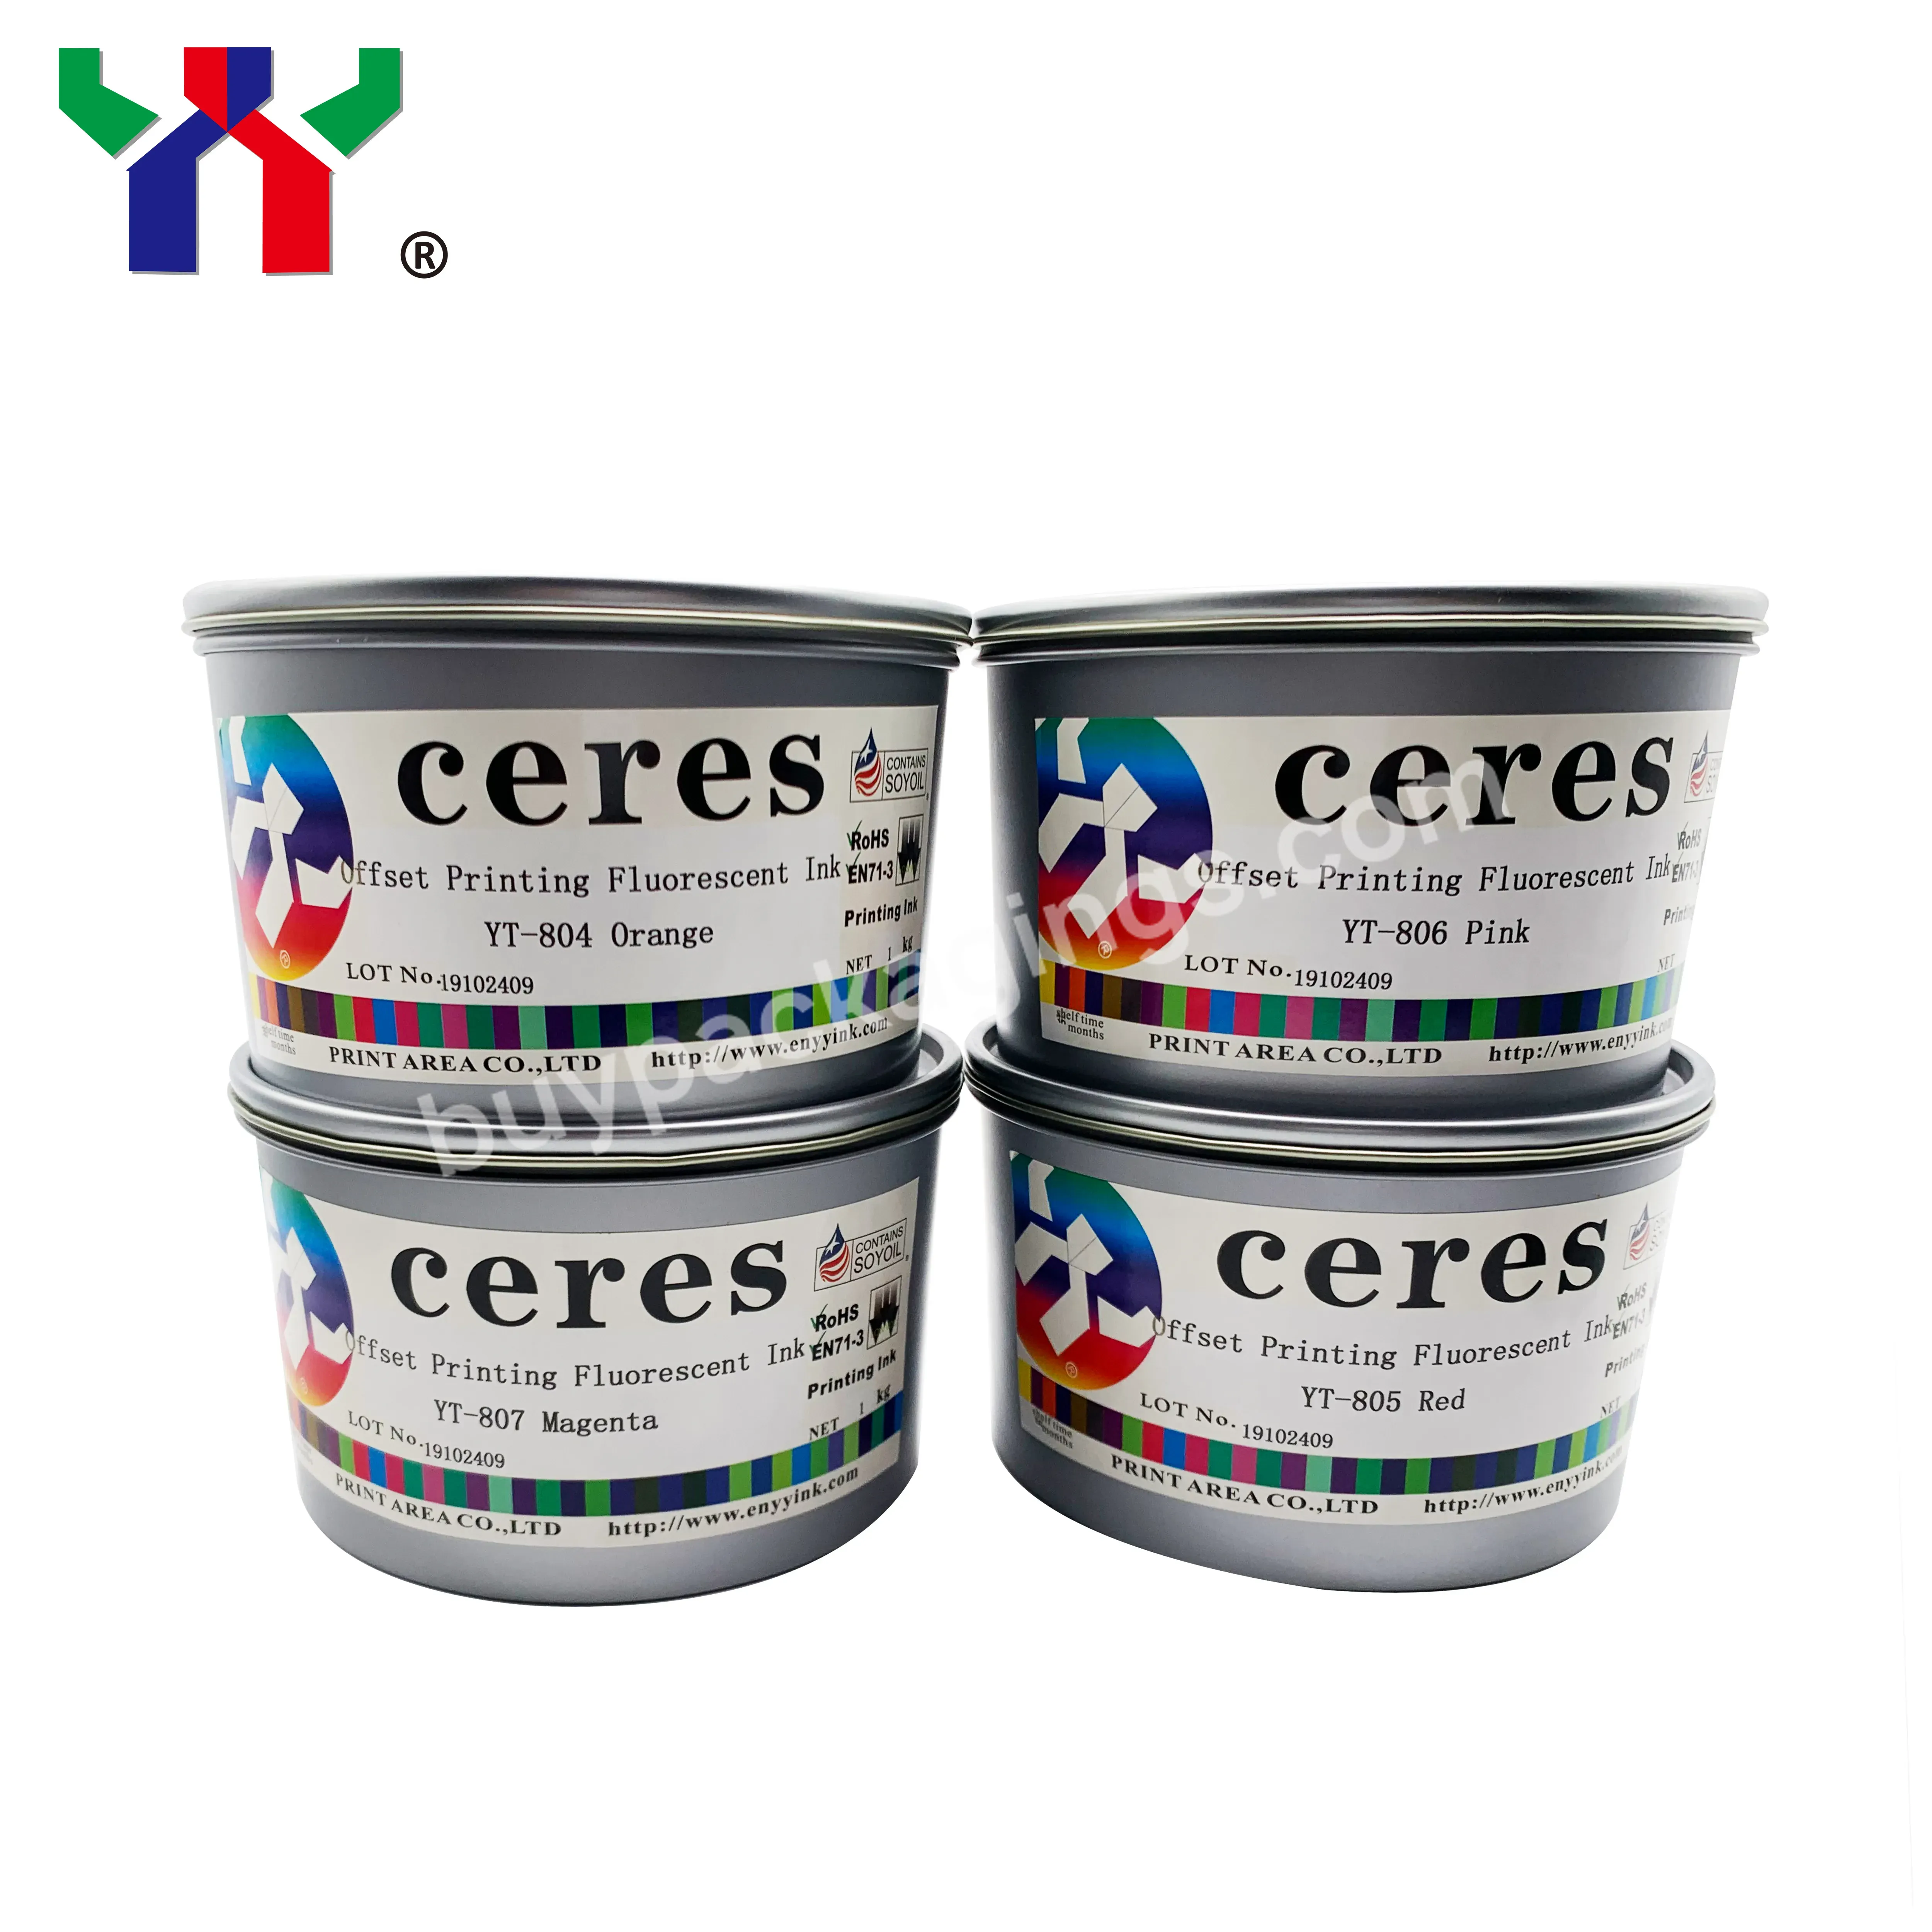 High Quality Ceres Offset Printing Fluorescent Ink - Yt-807 Magenta,1 Kg/can - Buy Fluorescent Ink,Pantone Ink,Fluorescent Offset Ink.